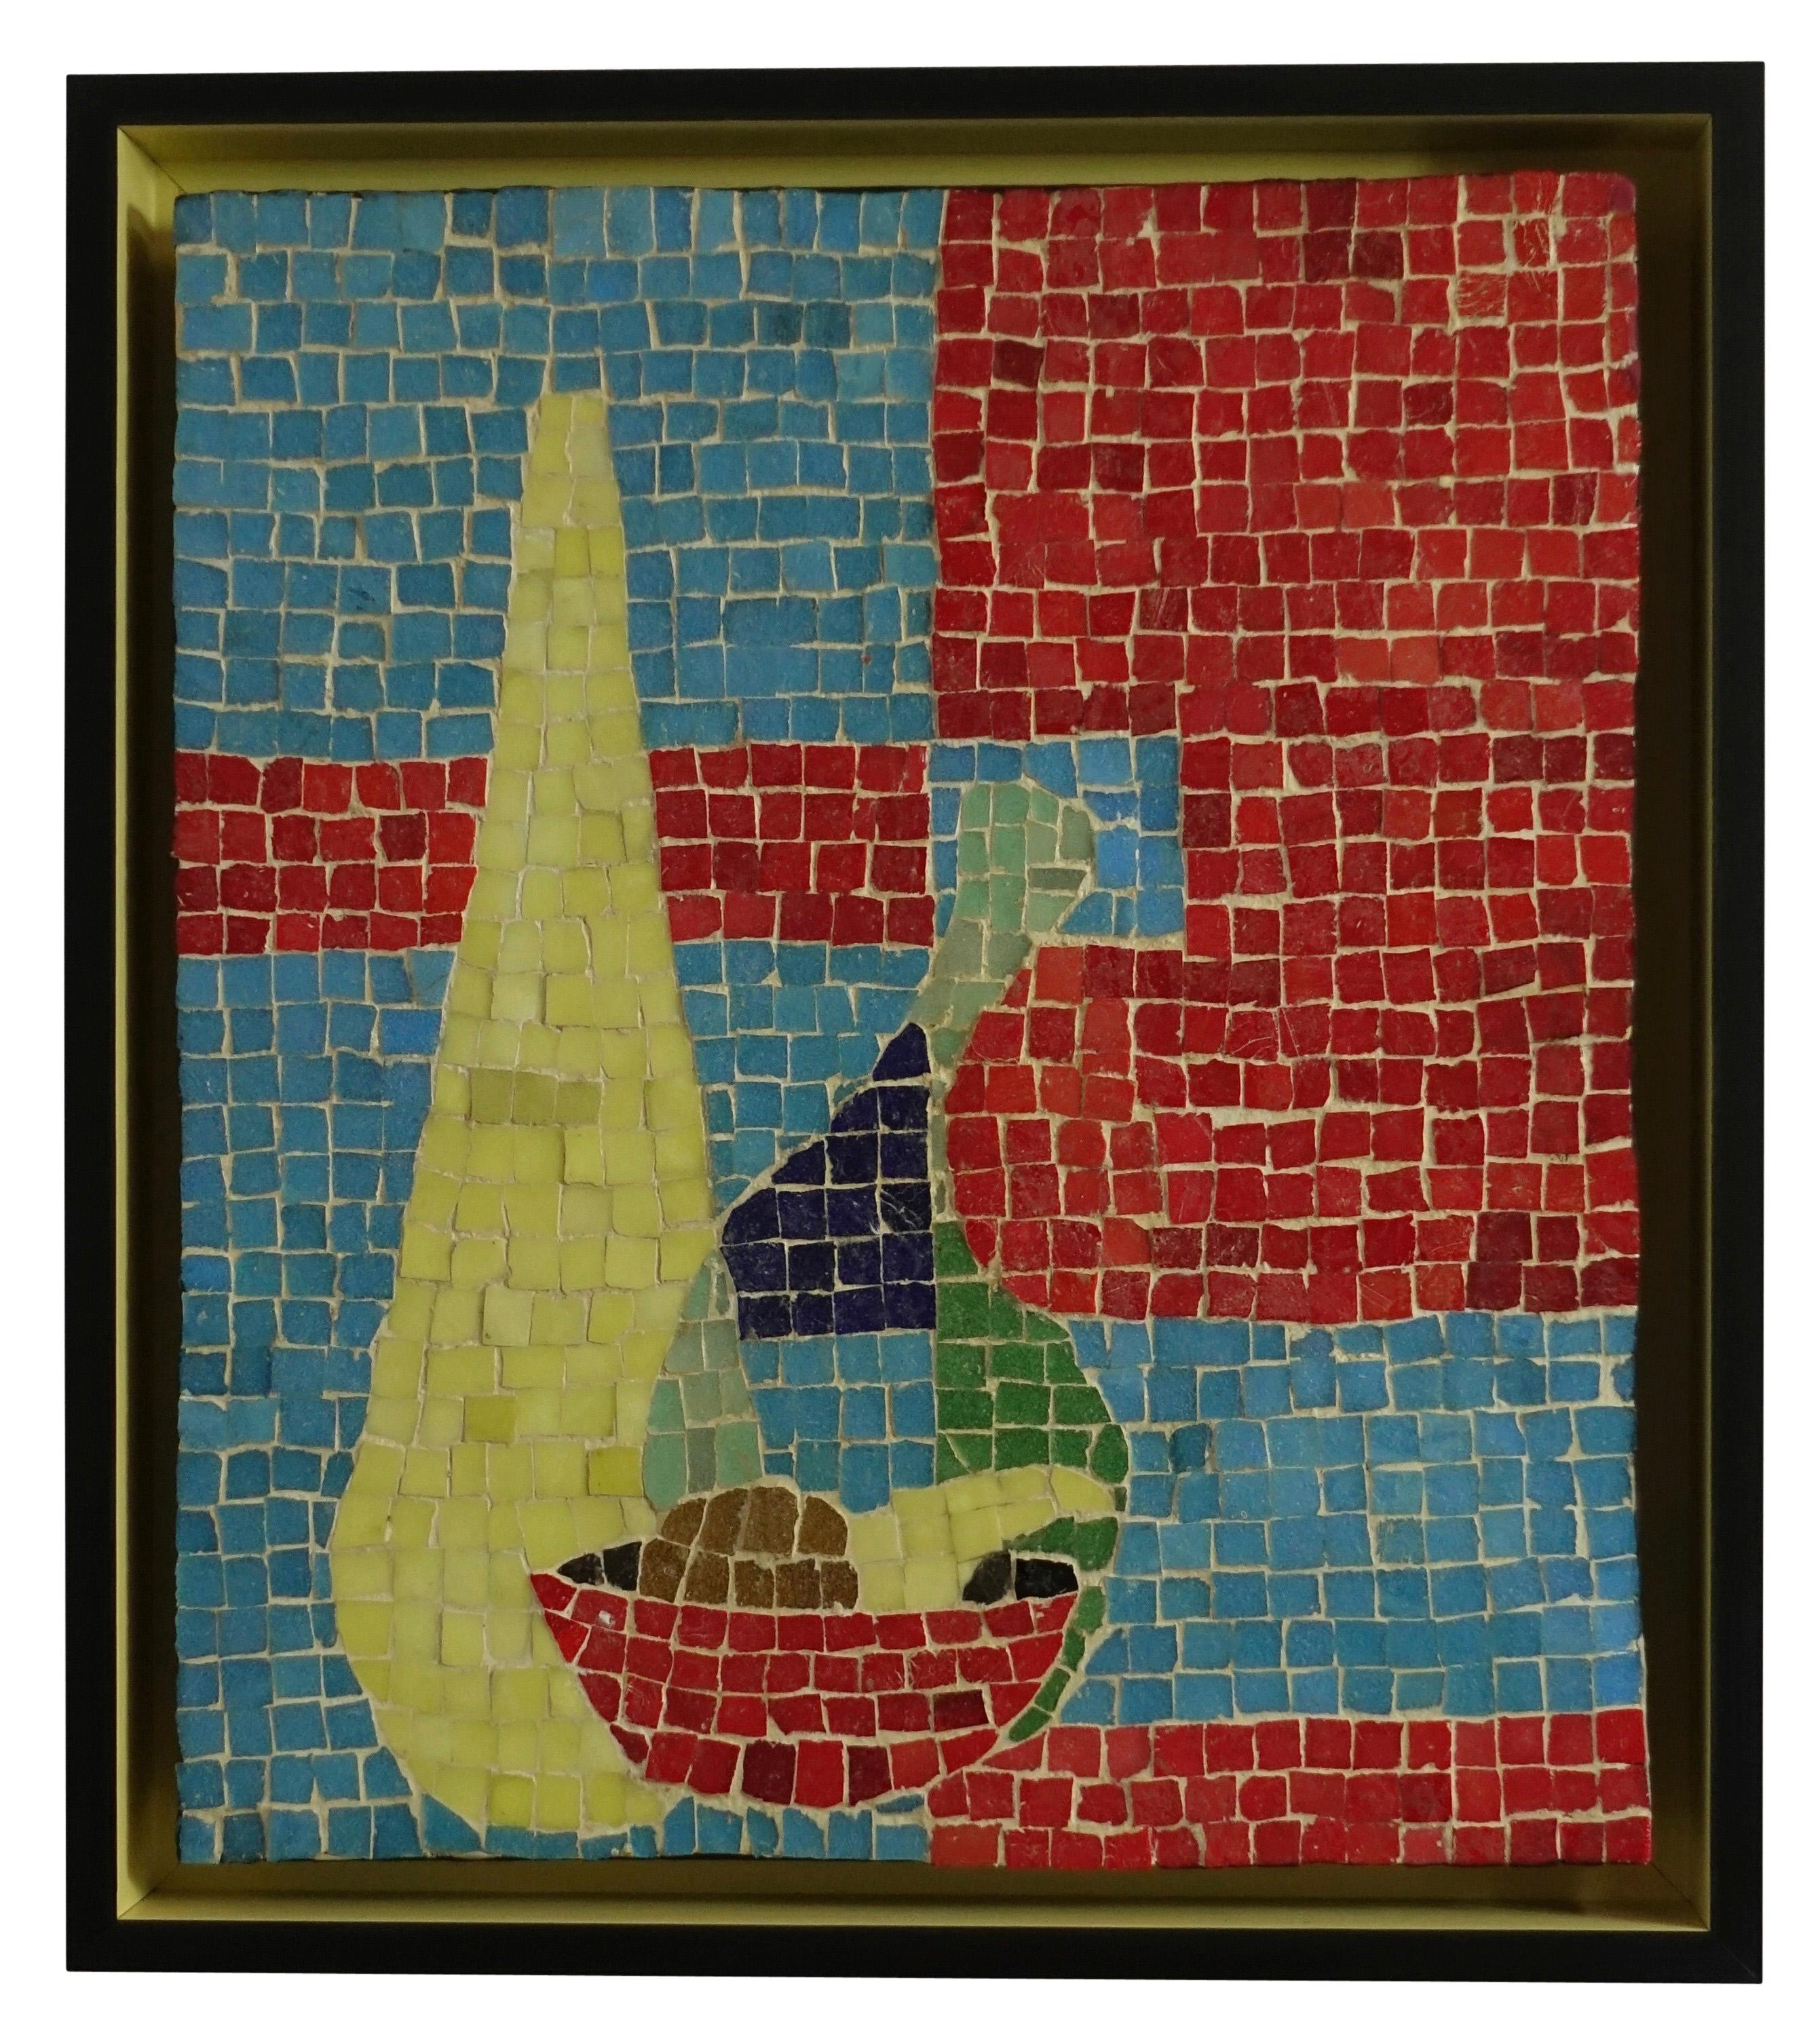 An unusual and lovely bright mosaic tile Still Life mounted on panel from the 1950s-1960s. Recently custom framed in a shadowbox mounting.
American, mid-20th century.